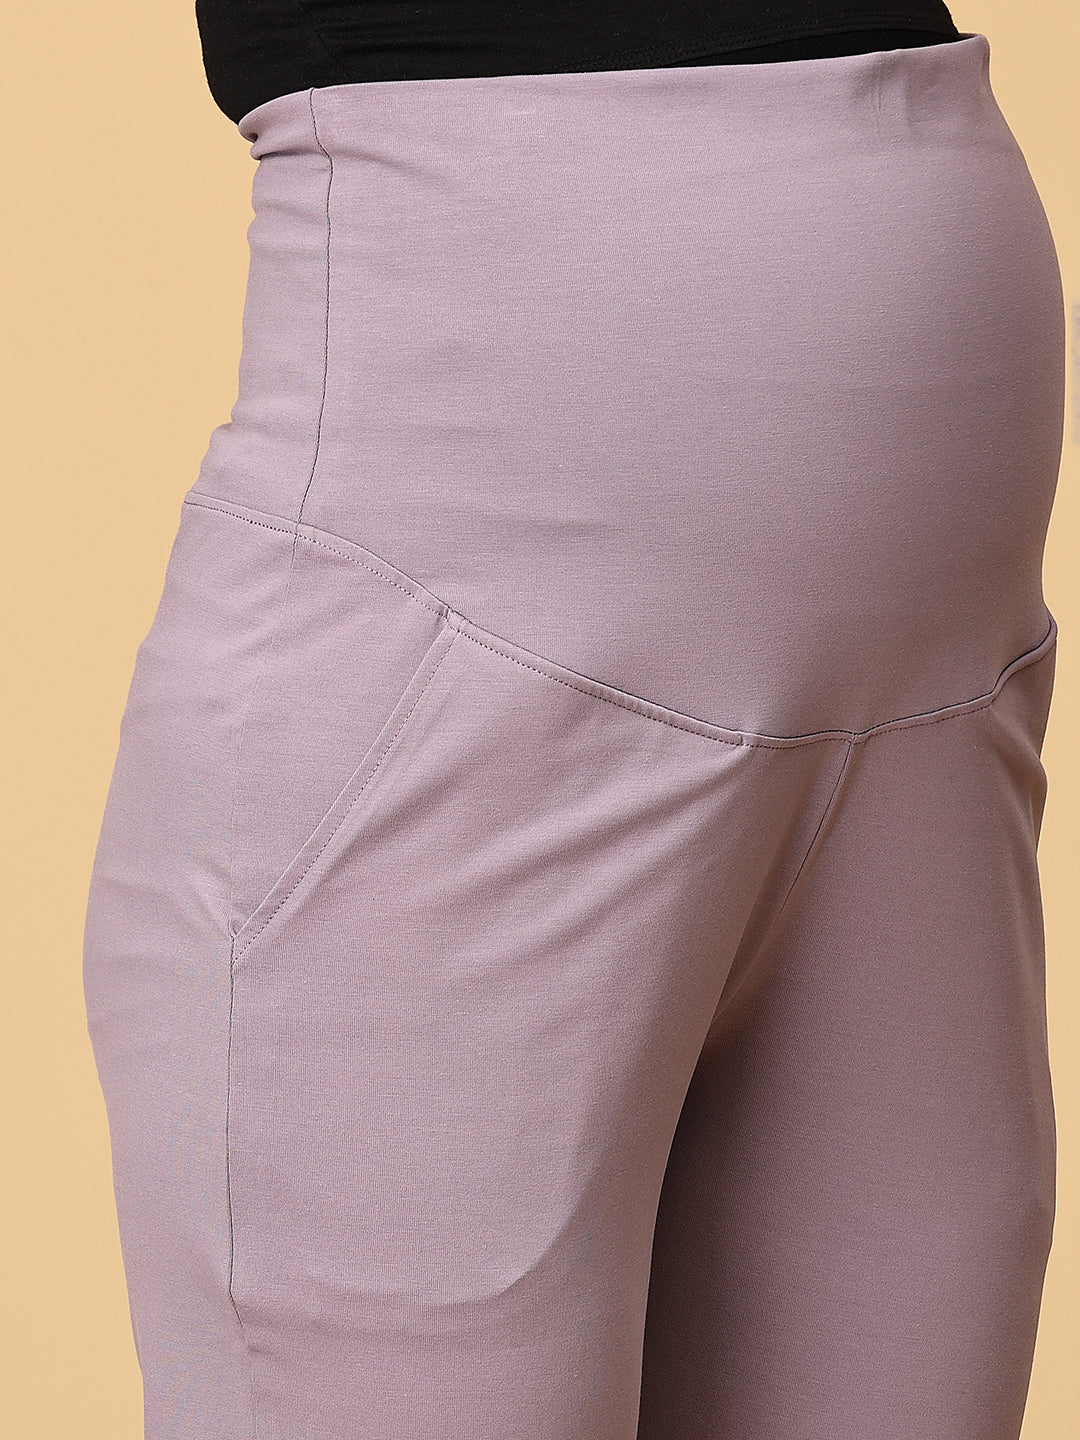 Lavender Tranquility Maternity Athleisure Trackpants